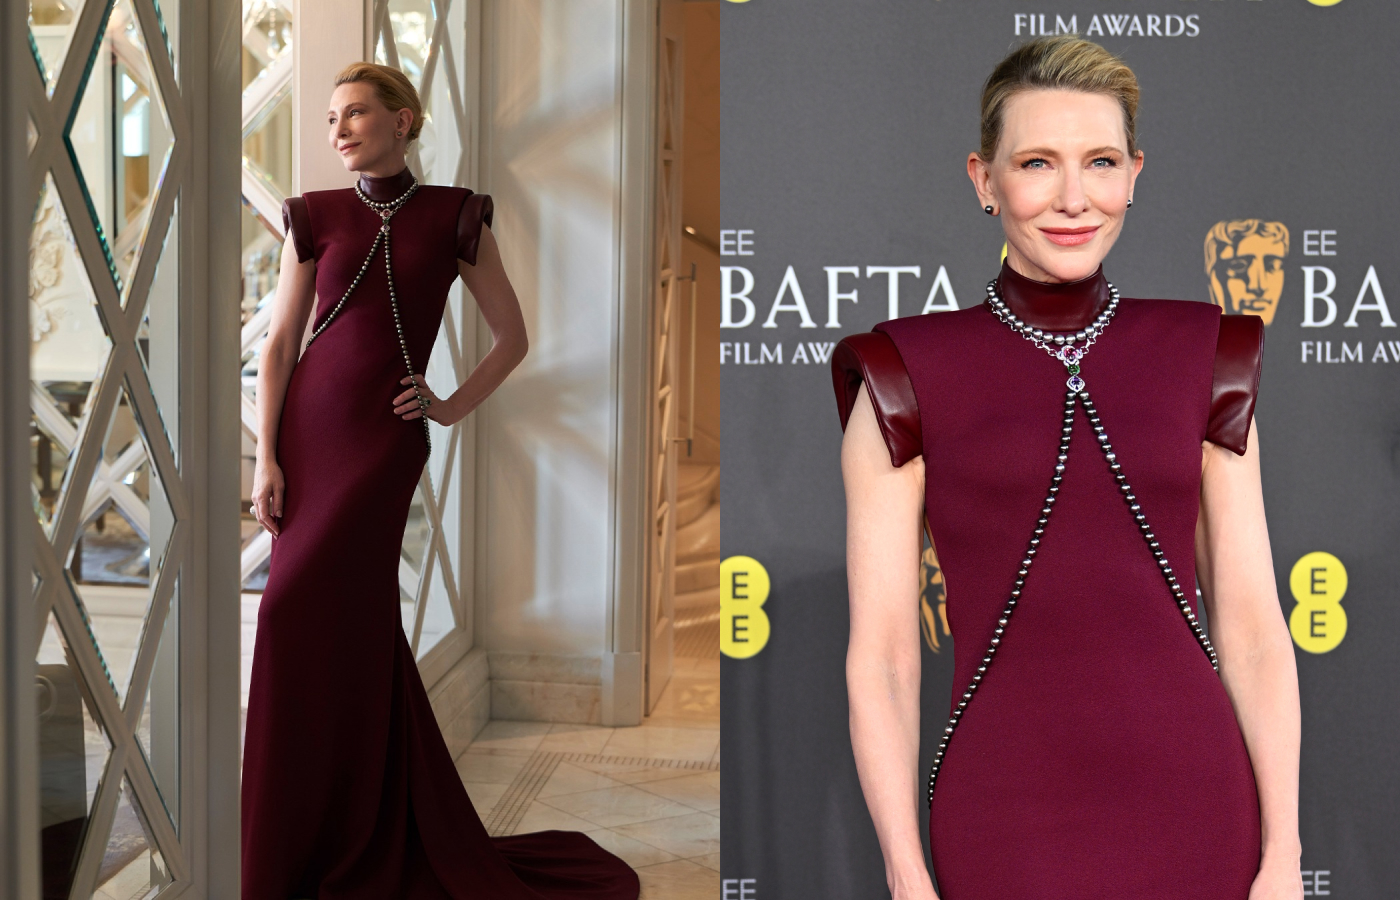 Cate Blanchett wearing a repurposed Louis Vuitton high jewellery body chain in white gold, Tahitian pearls, coloured gemstones, including a 15.25-ct cushion-cut pink spinel, a 10.73-ct cushion-cut tsavorite garnet and a 2.70-ct oval purple sapphire, and diamonds